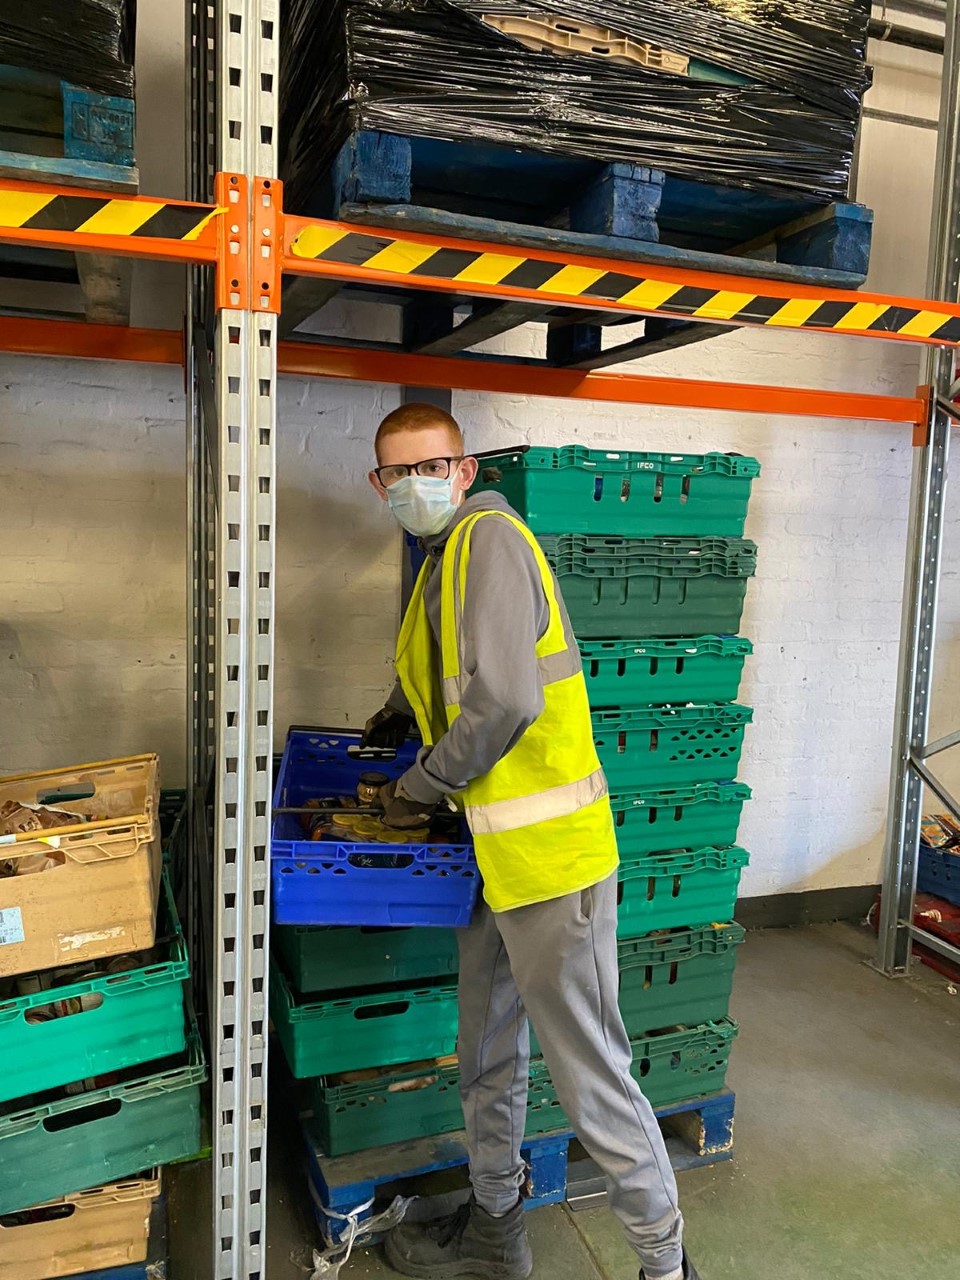 Charity: FareShare has donated 218 tonnes of food since the lockdown began.